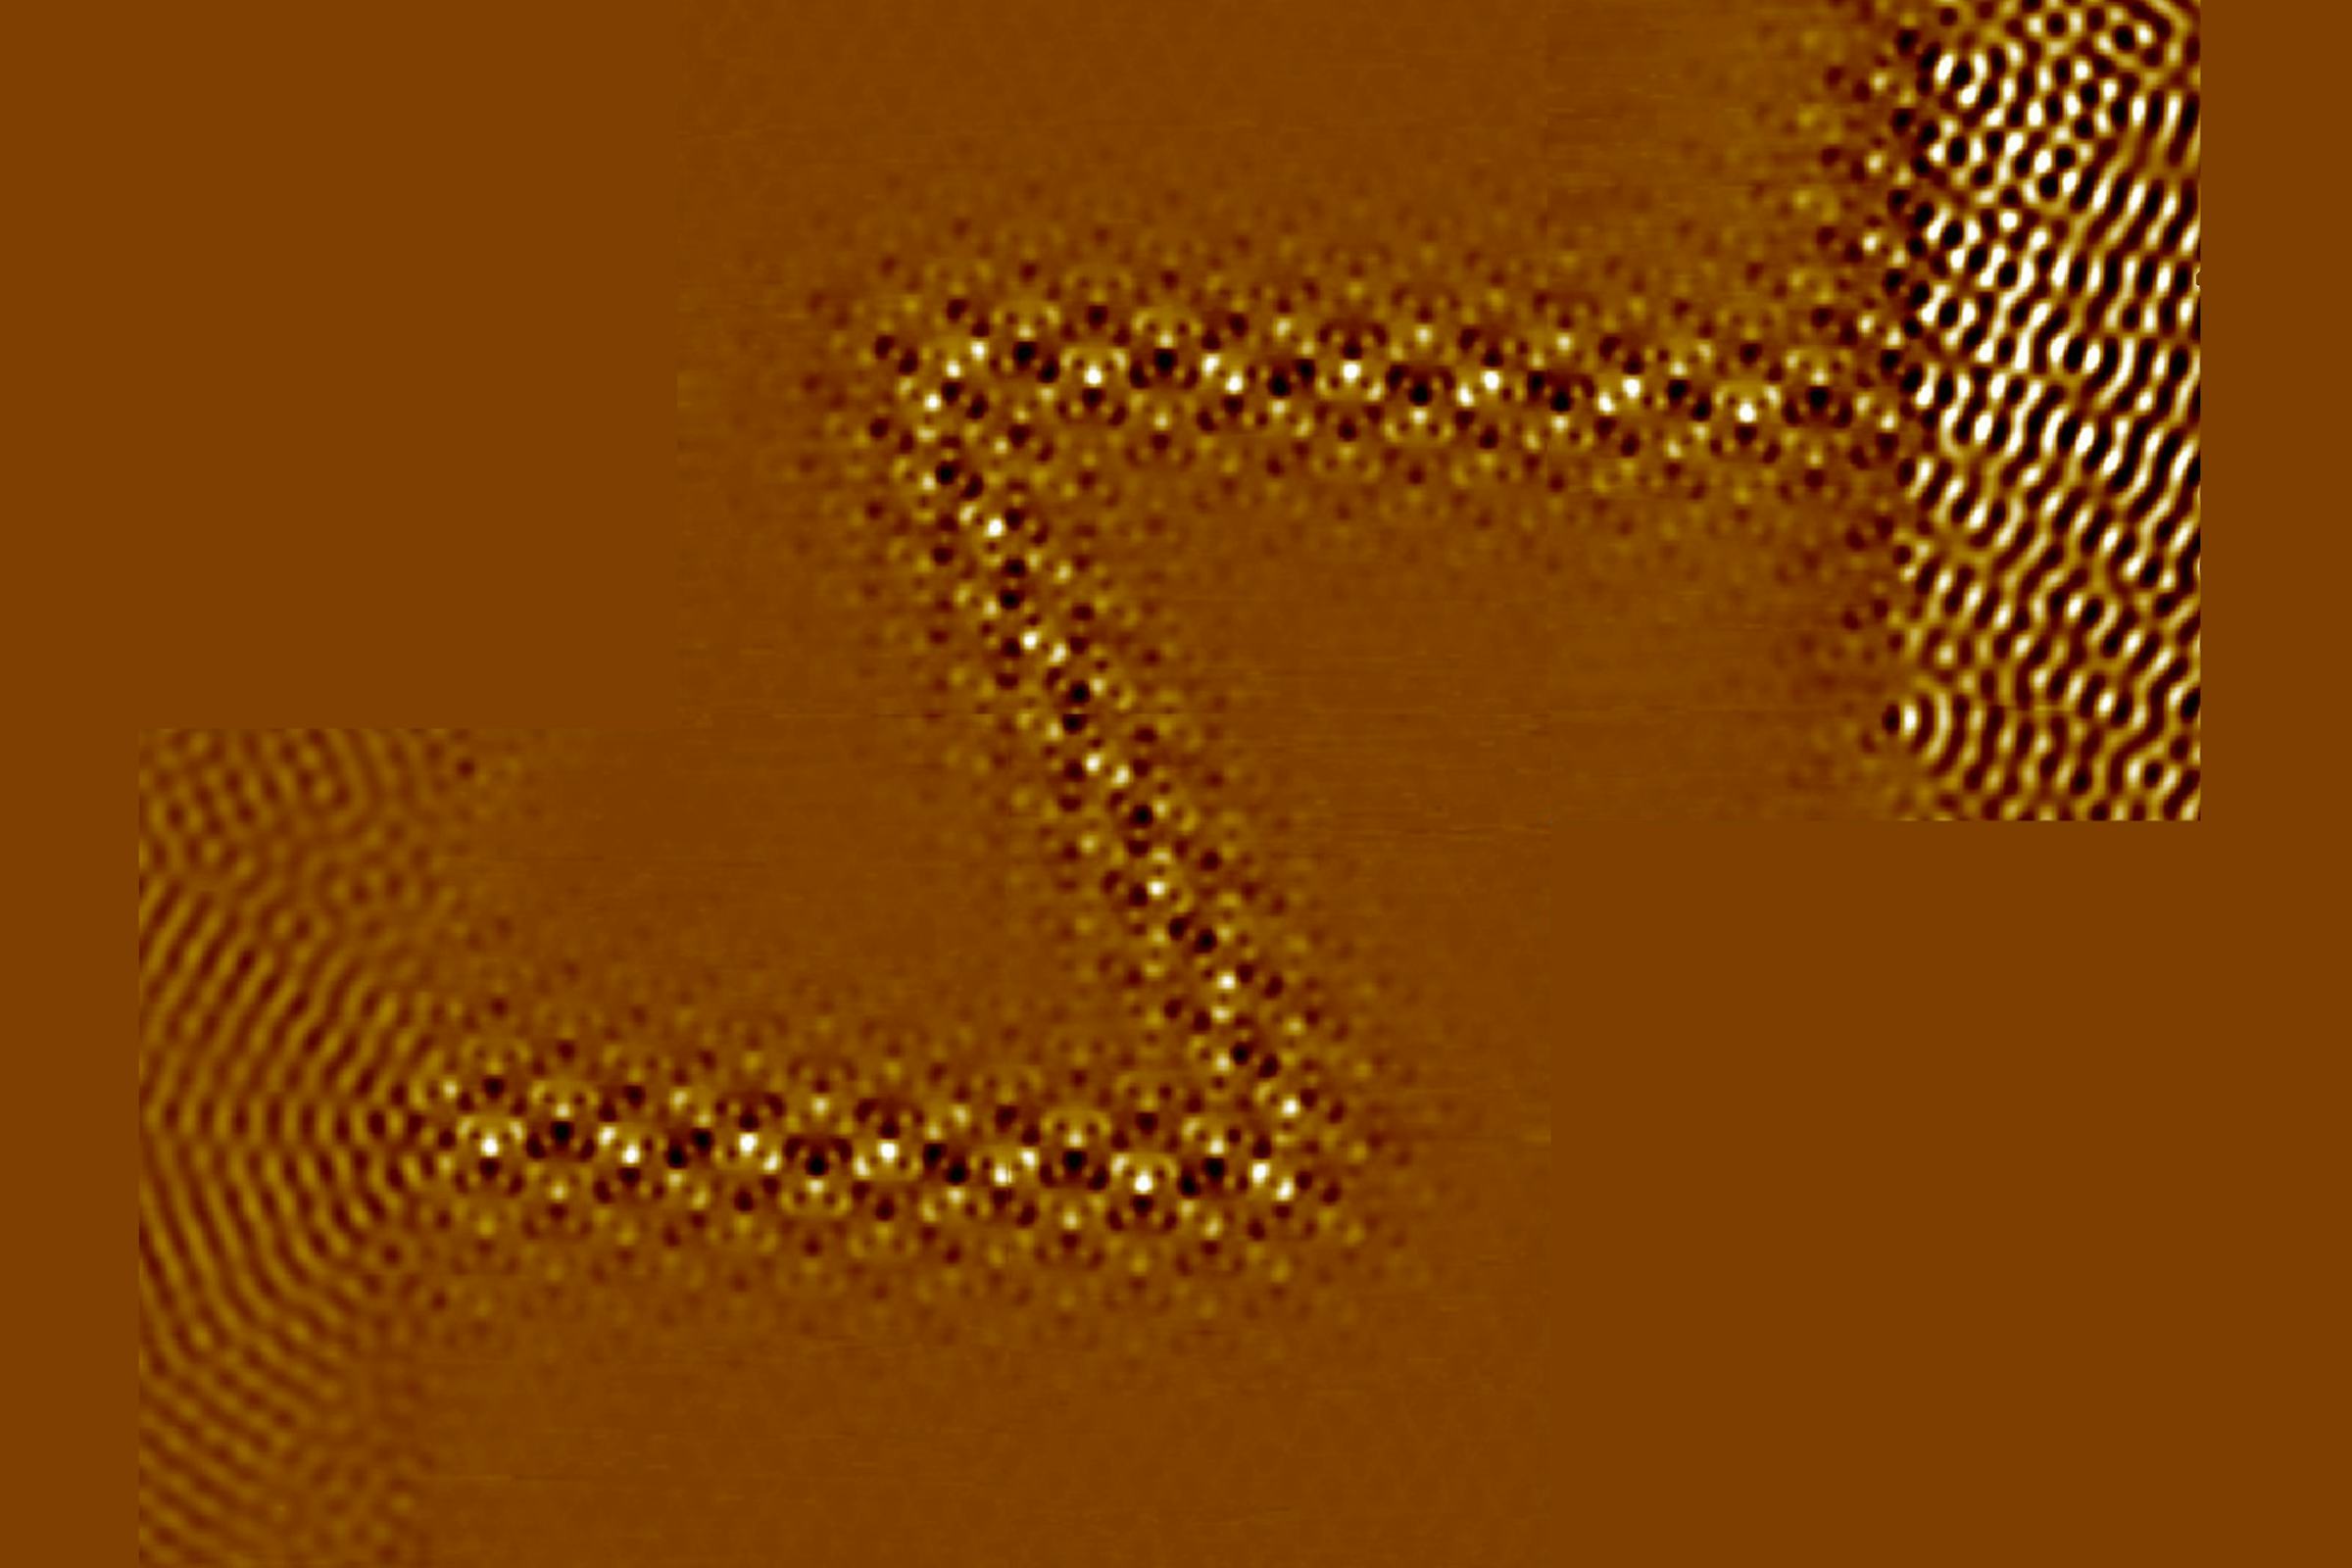 Light colored pattern on a dark orange background. A path zigs from the right to left like a backward letter Z.